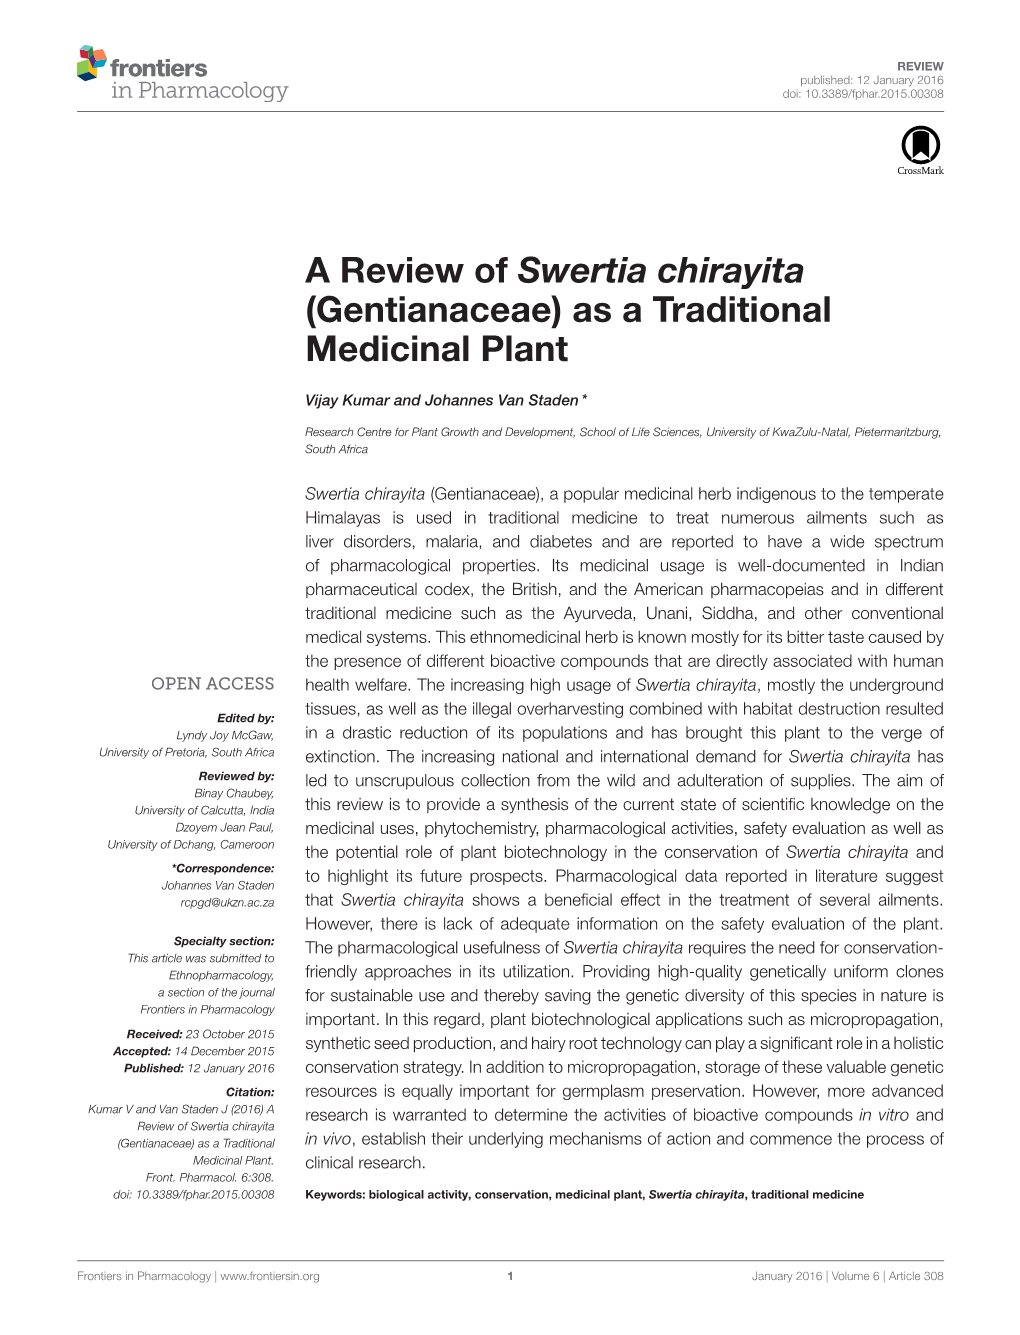 A Review of Swertia Chirayita (Gentianaceae) As a Traditional Medicinal Plant